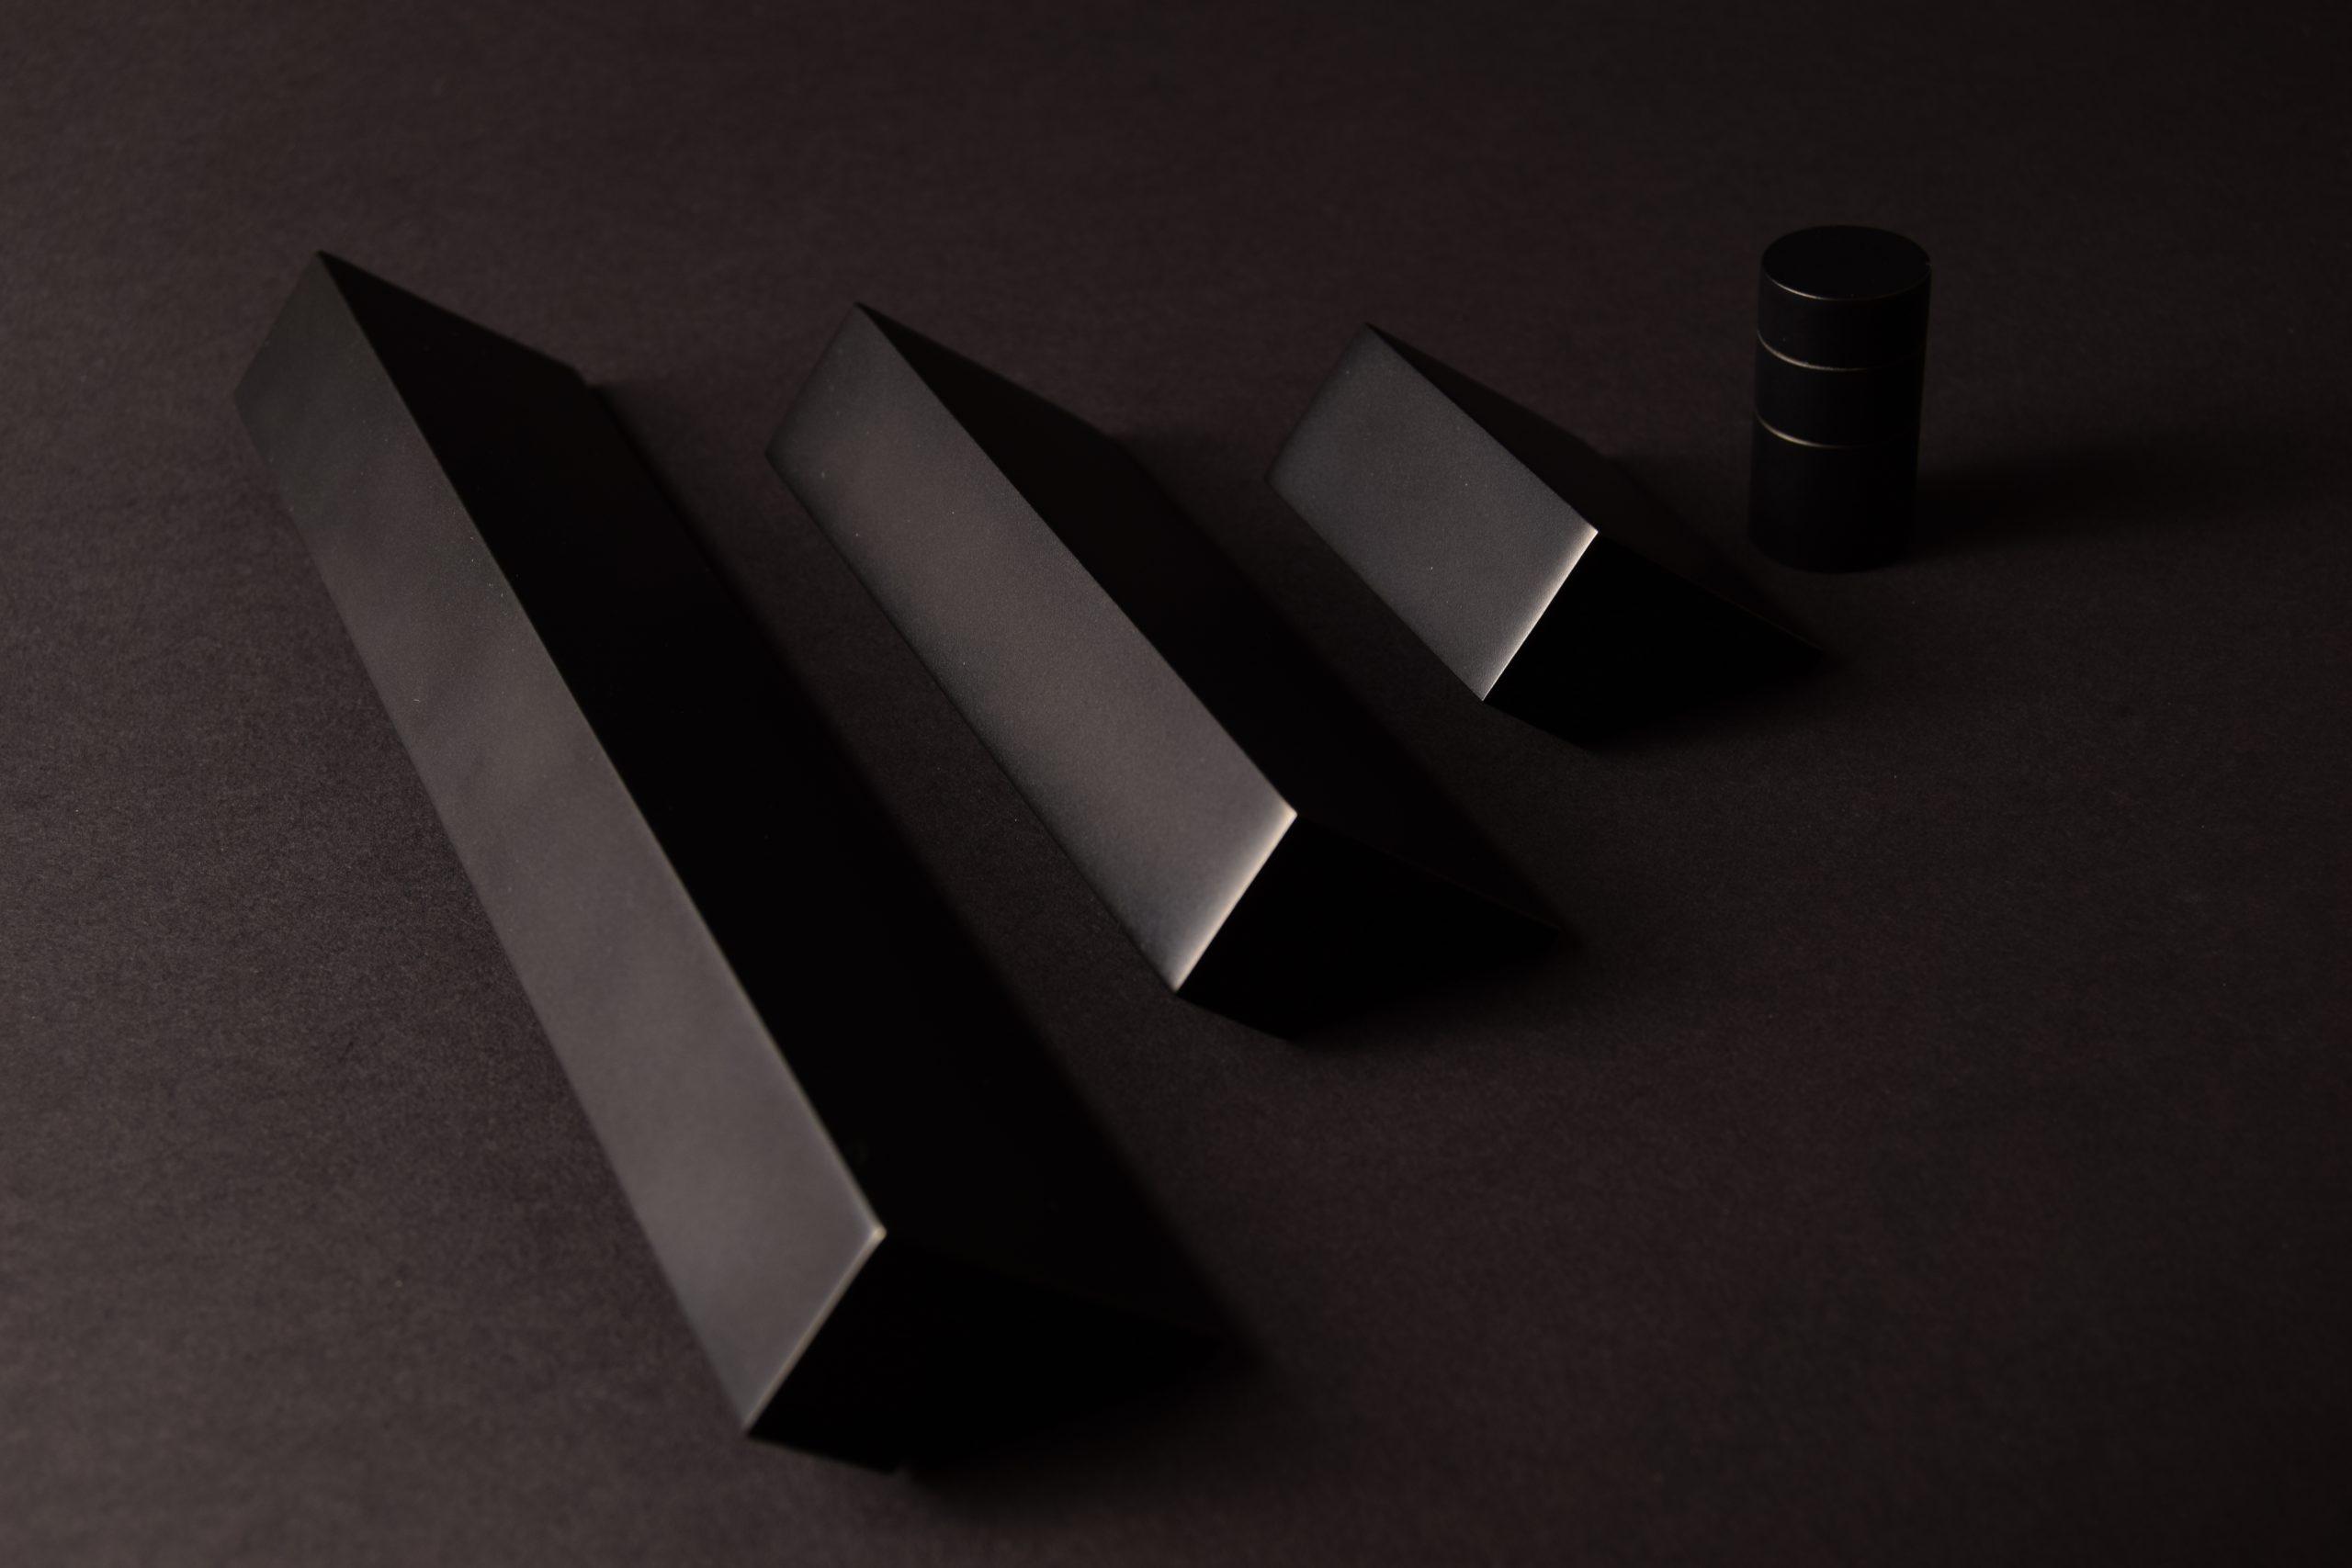 Image of a Solid ledge shown in a variety of three different sizes. Finished in a matt black chrome metal finish.